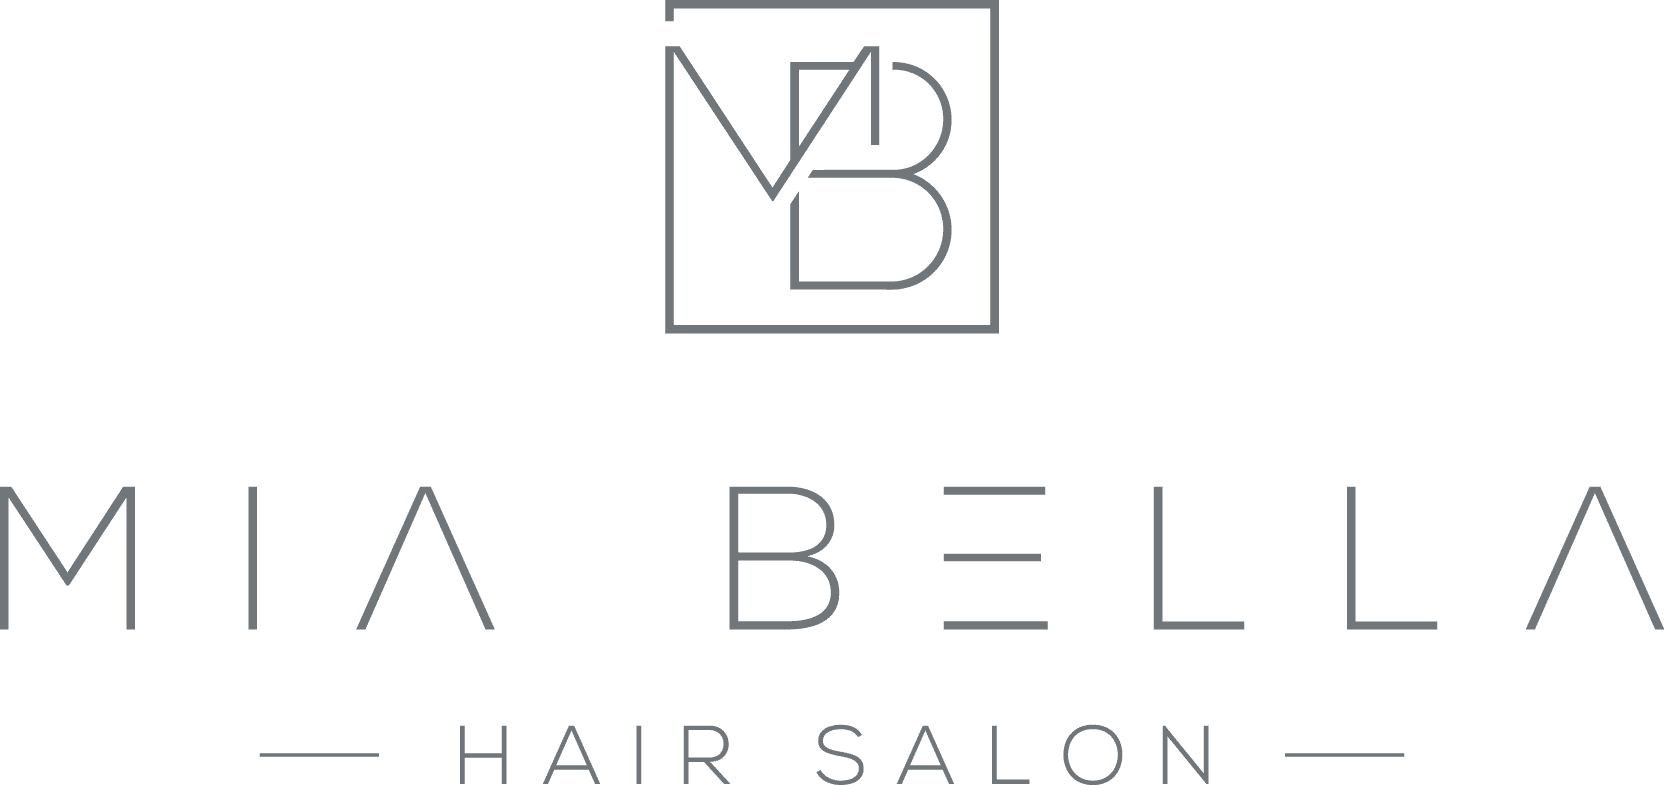 There Are Many Types Of Hair Salons In The United States